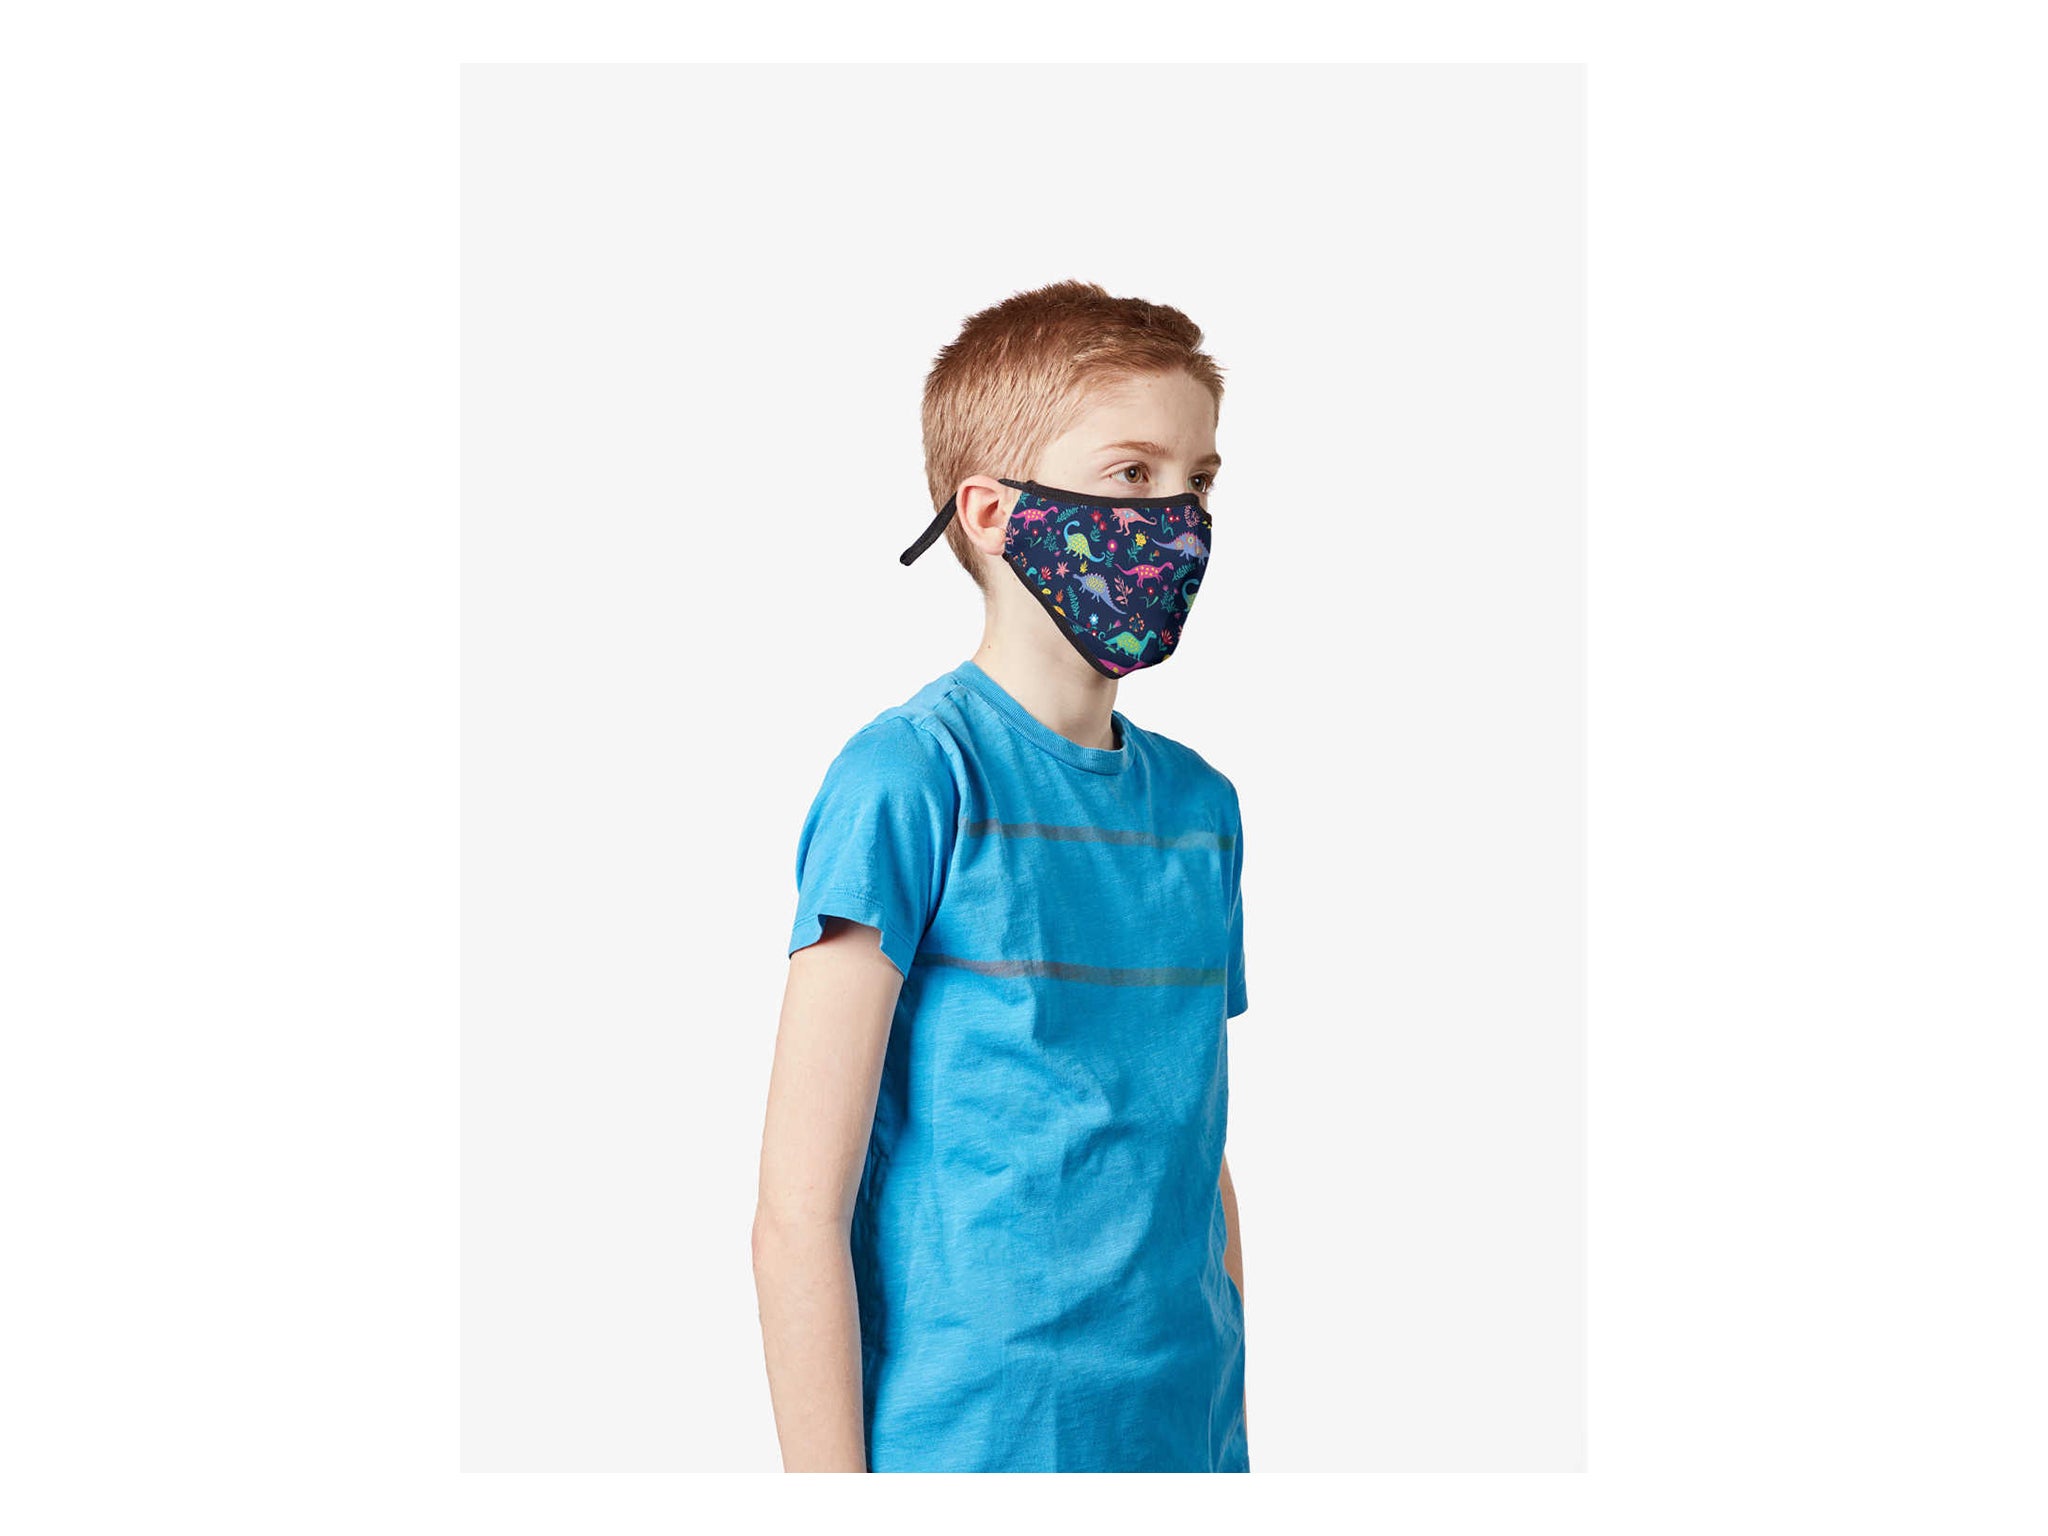 Vistaprint has made masks available for adults and kids